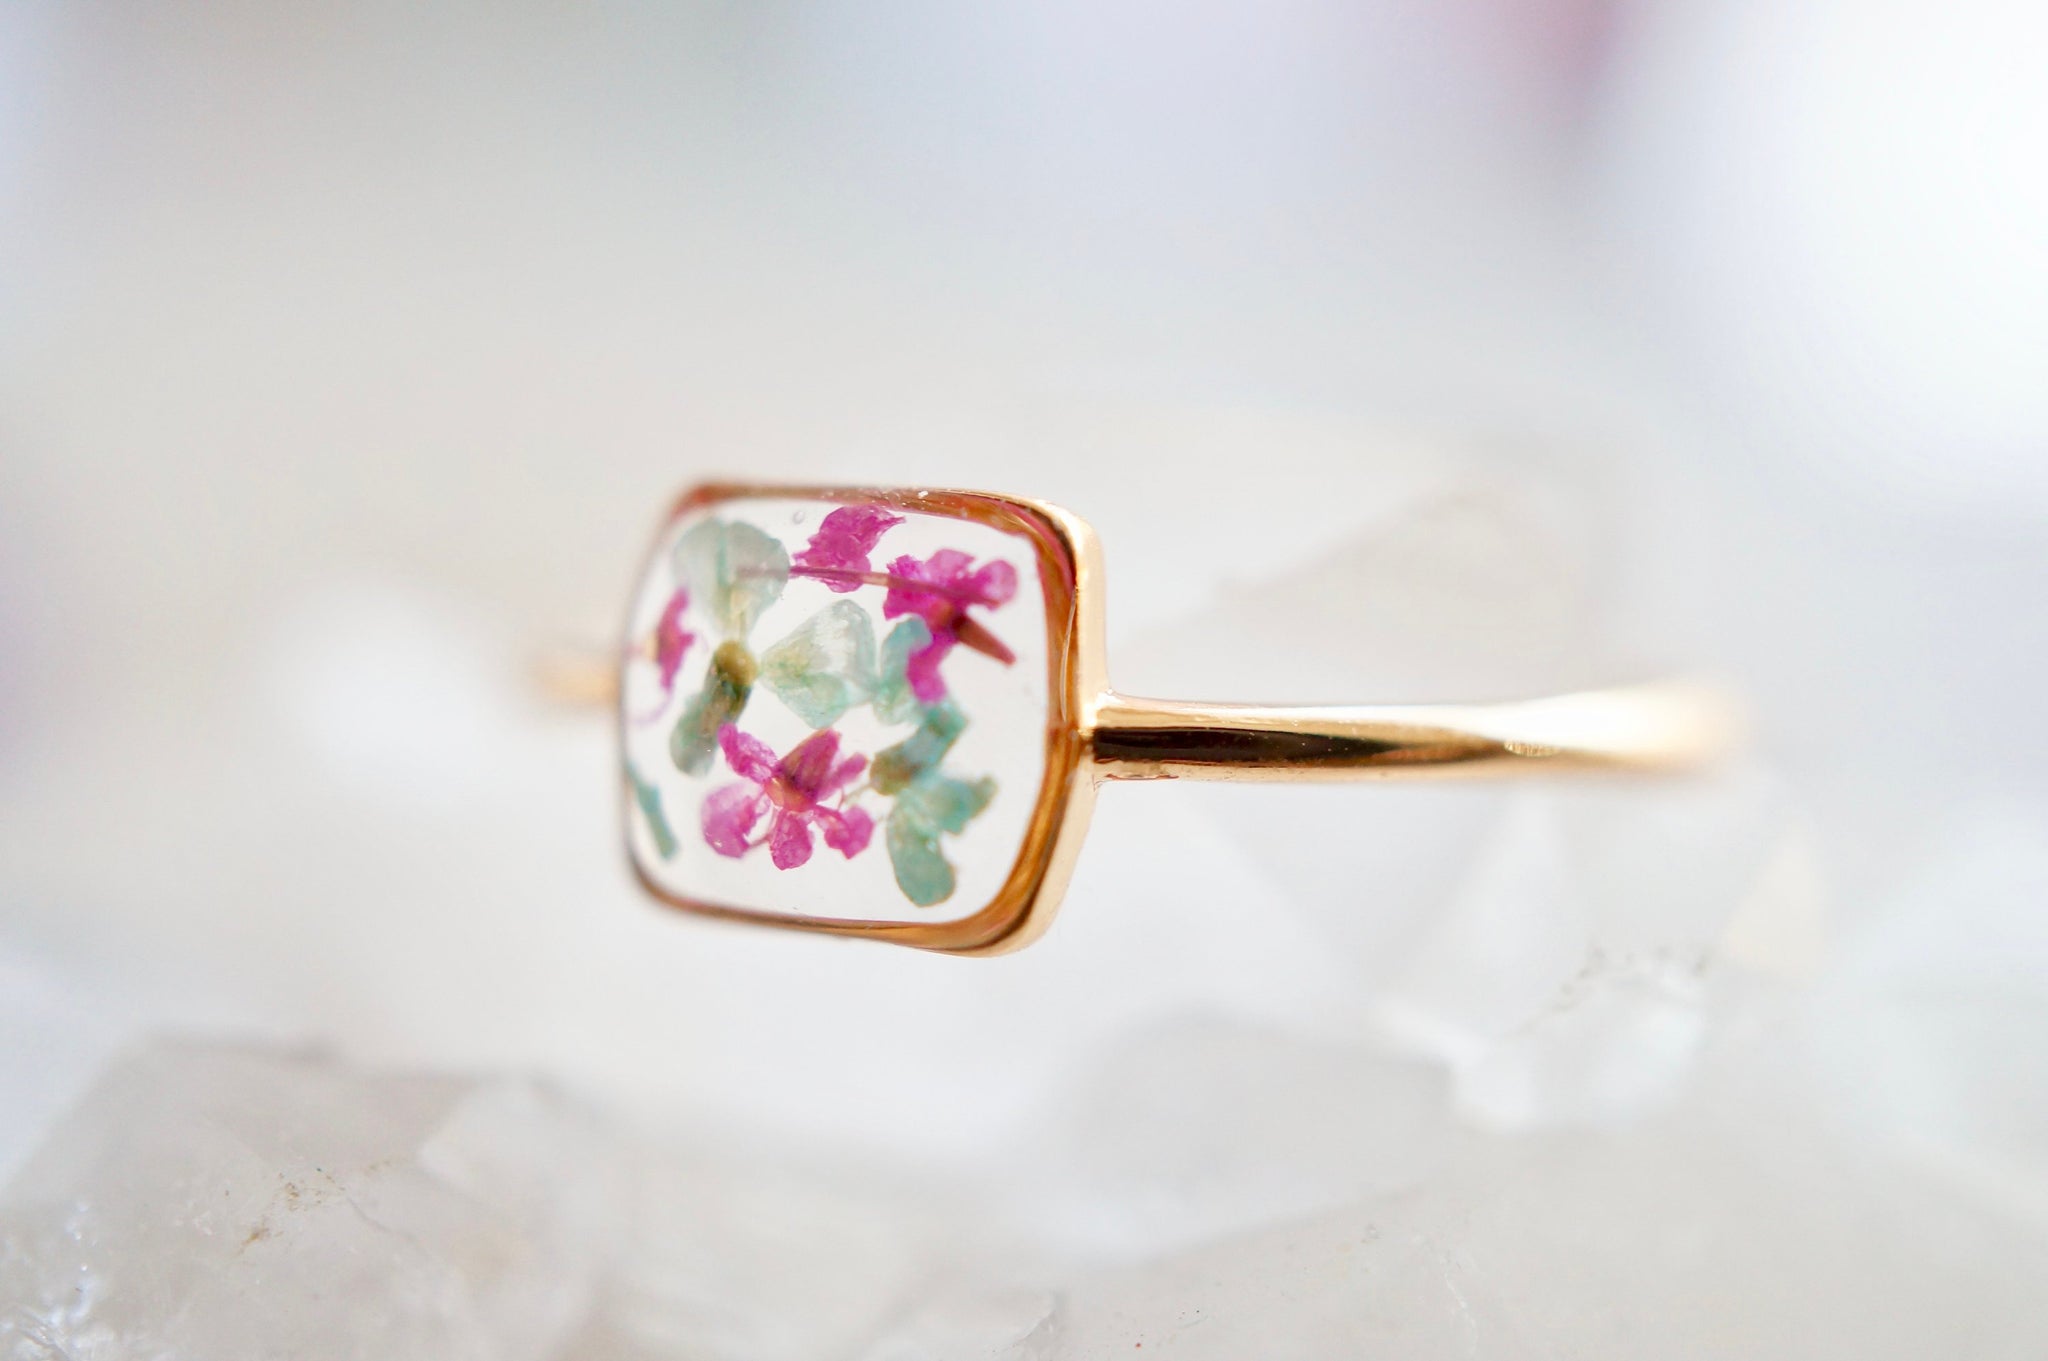 Clear Resin Ring Featuring Flower Accents. - One Size fits (87169)